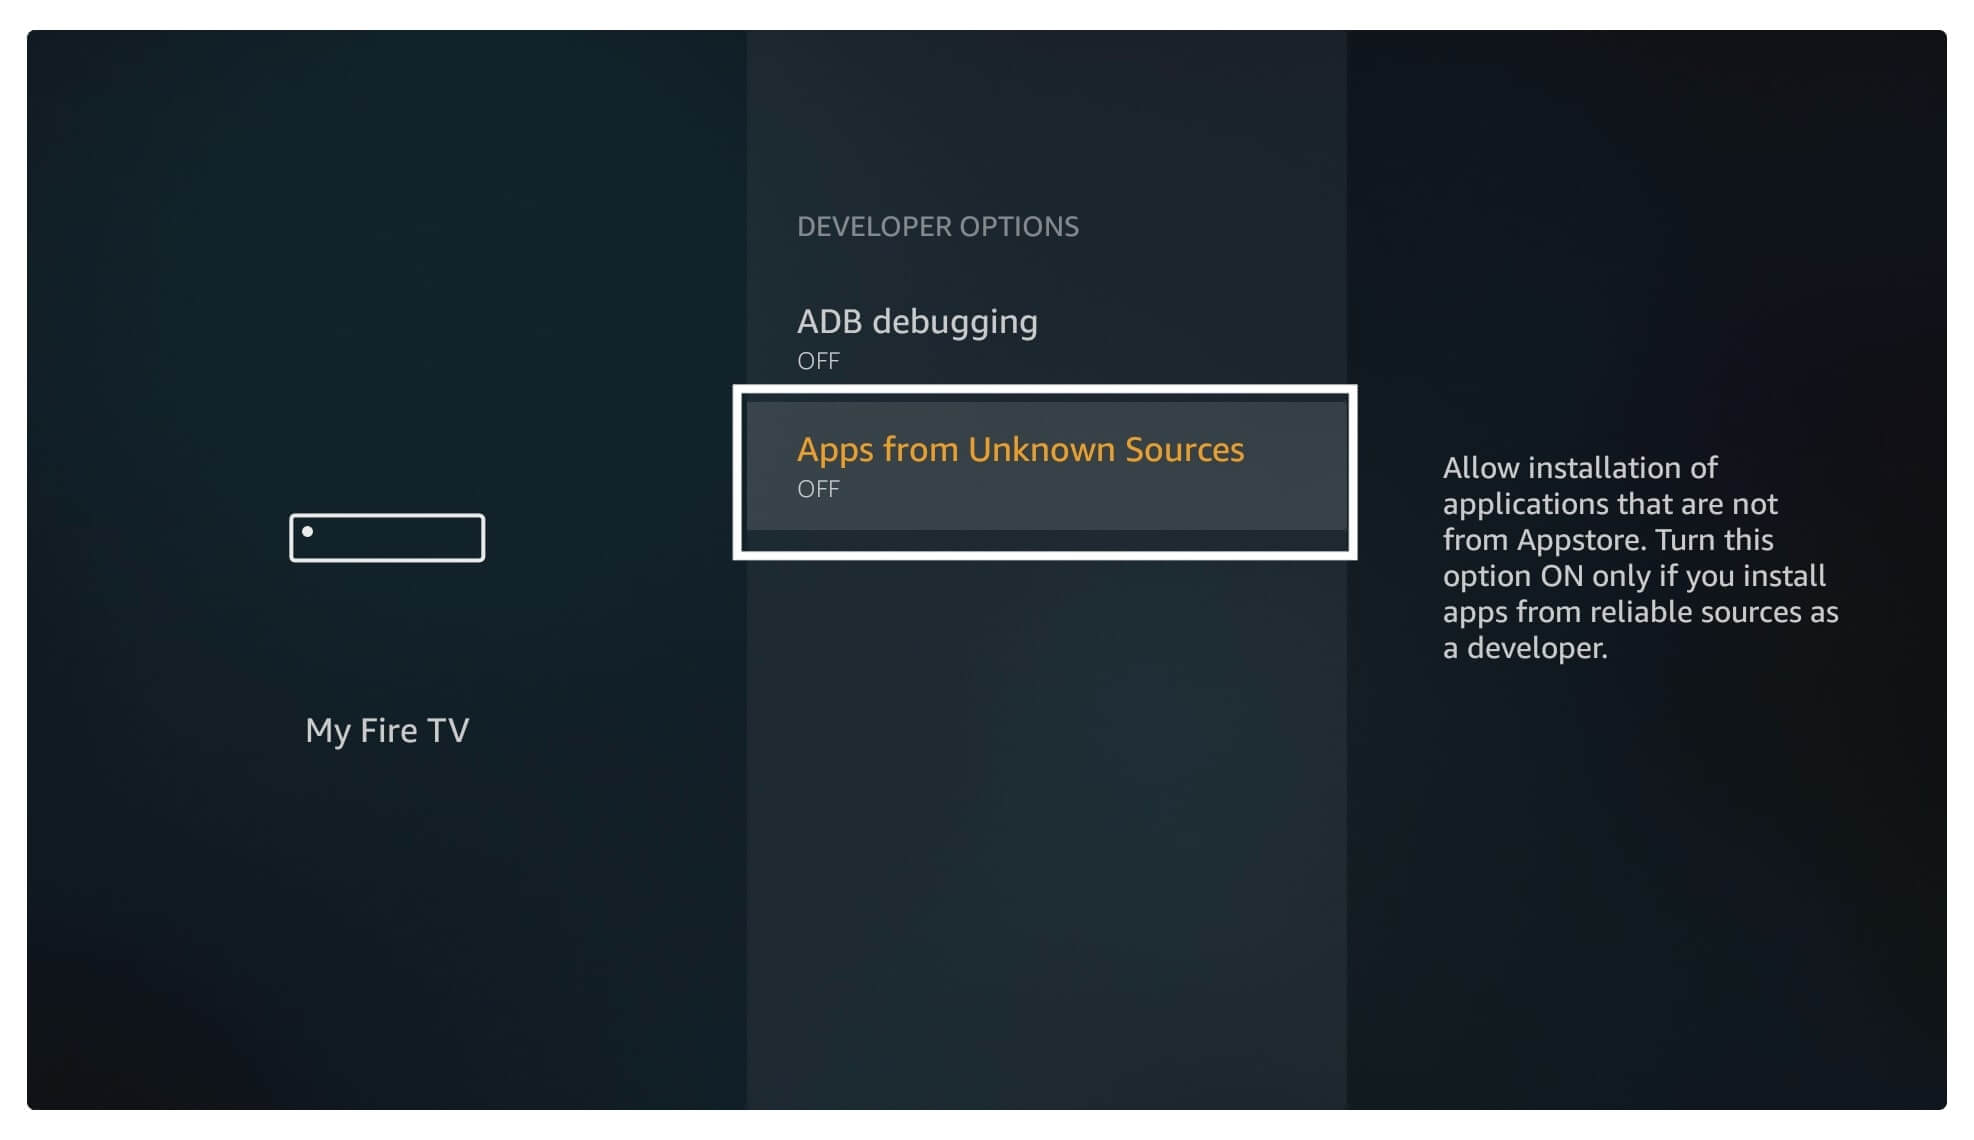 Kodi-For-FireTV-Stick-and-Off-unkown-apps